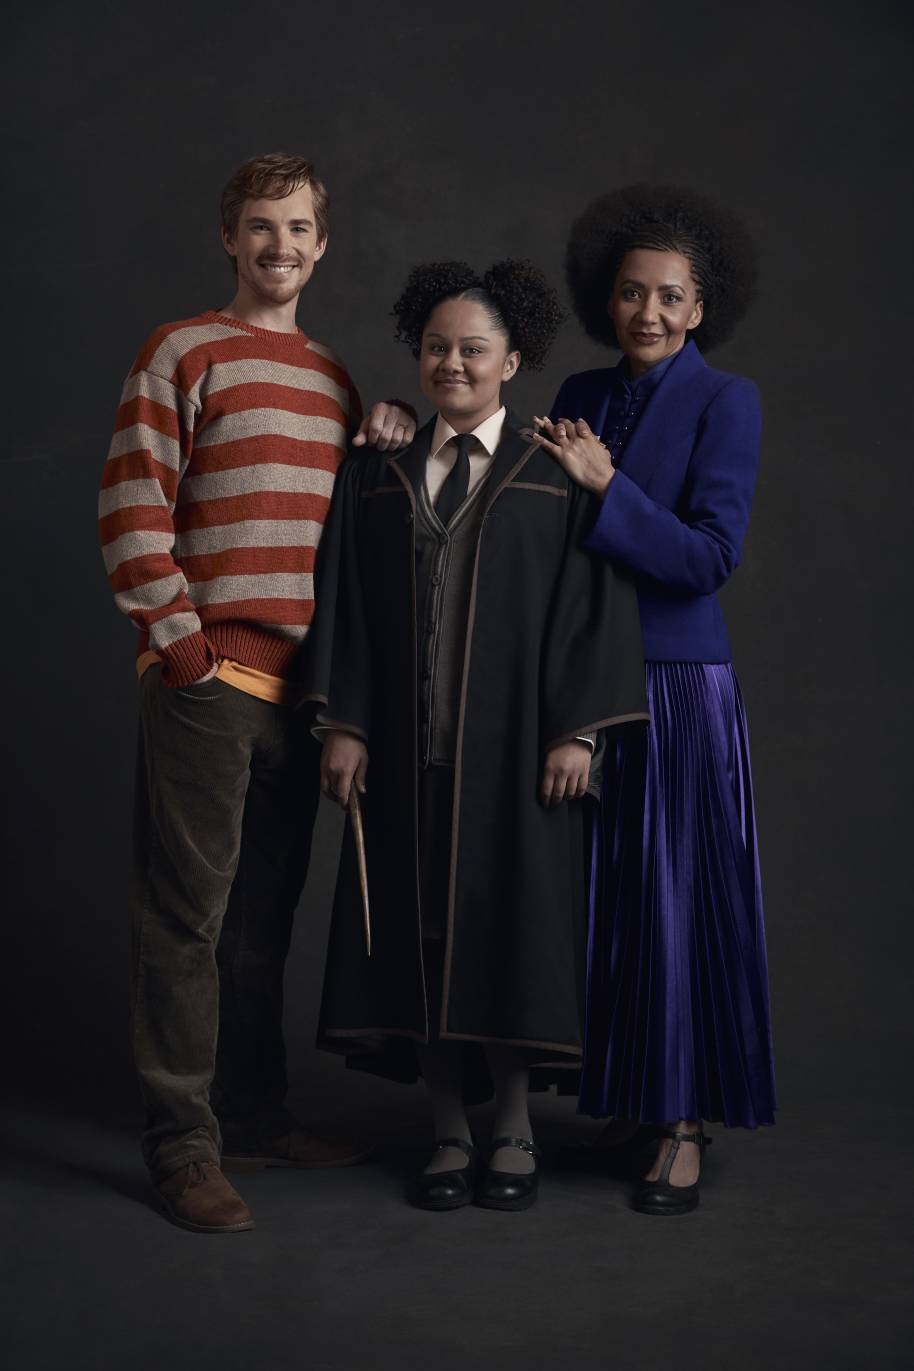 From left to right: Michael Whalley as Ron Weasley, Manali Datar as Rose Granger-Weasley, Paula Arundell as Hermione Granger